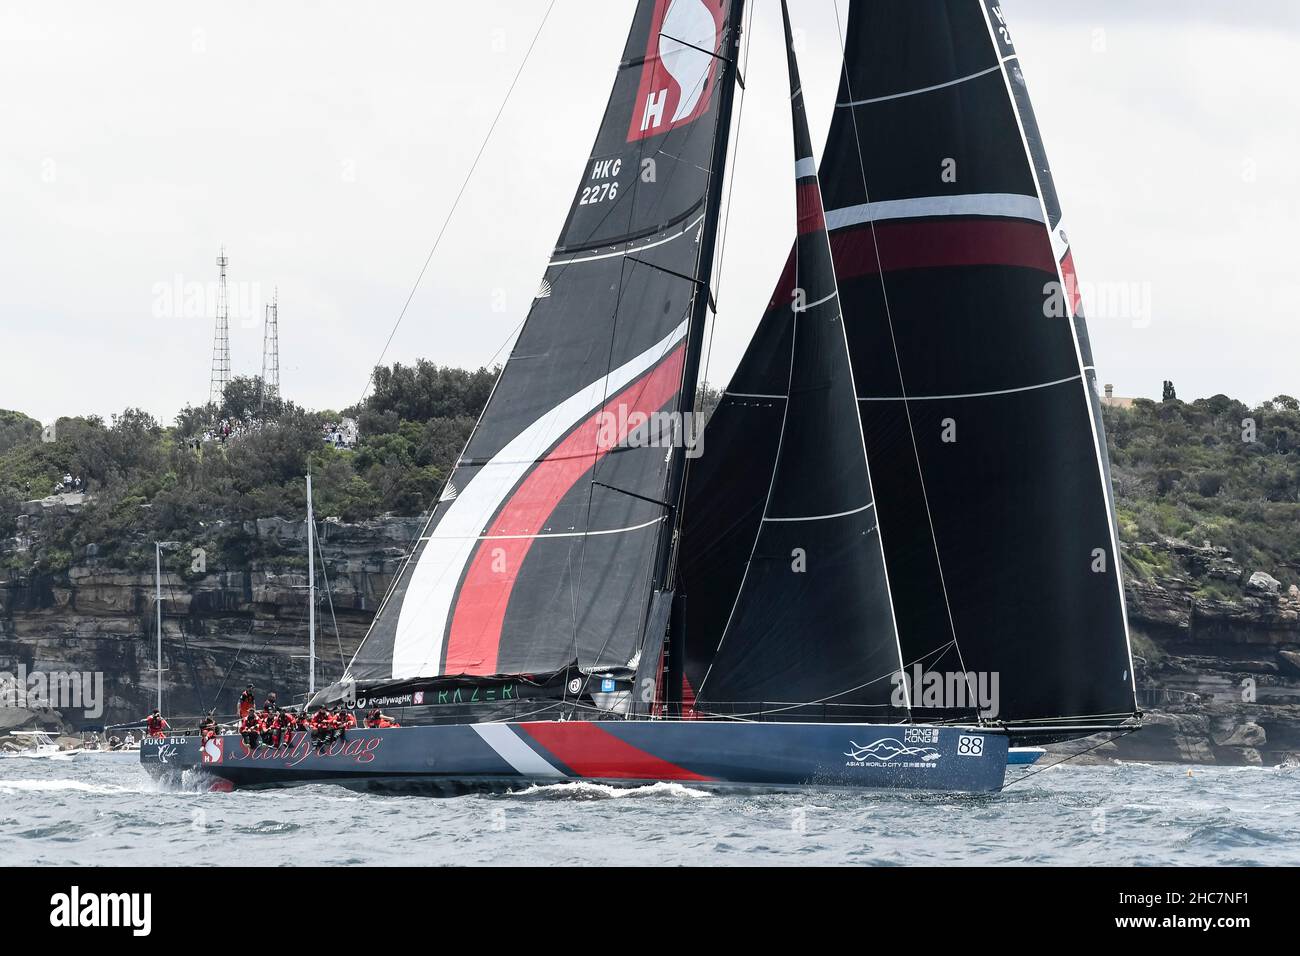 Sydney Harbour, Sydney, Australia. 26th Dec, 2021. Rolex Sydney Hobart Yacht Race; SHK SCALLYWAG 100 skippered by David Witt takes the lead as the fleet approaches the Heads Credit: Action Plus Sports/Alamy Live News Stock Photo